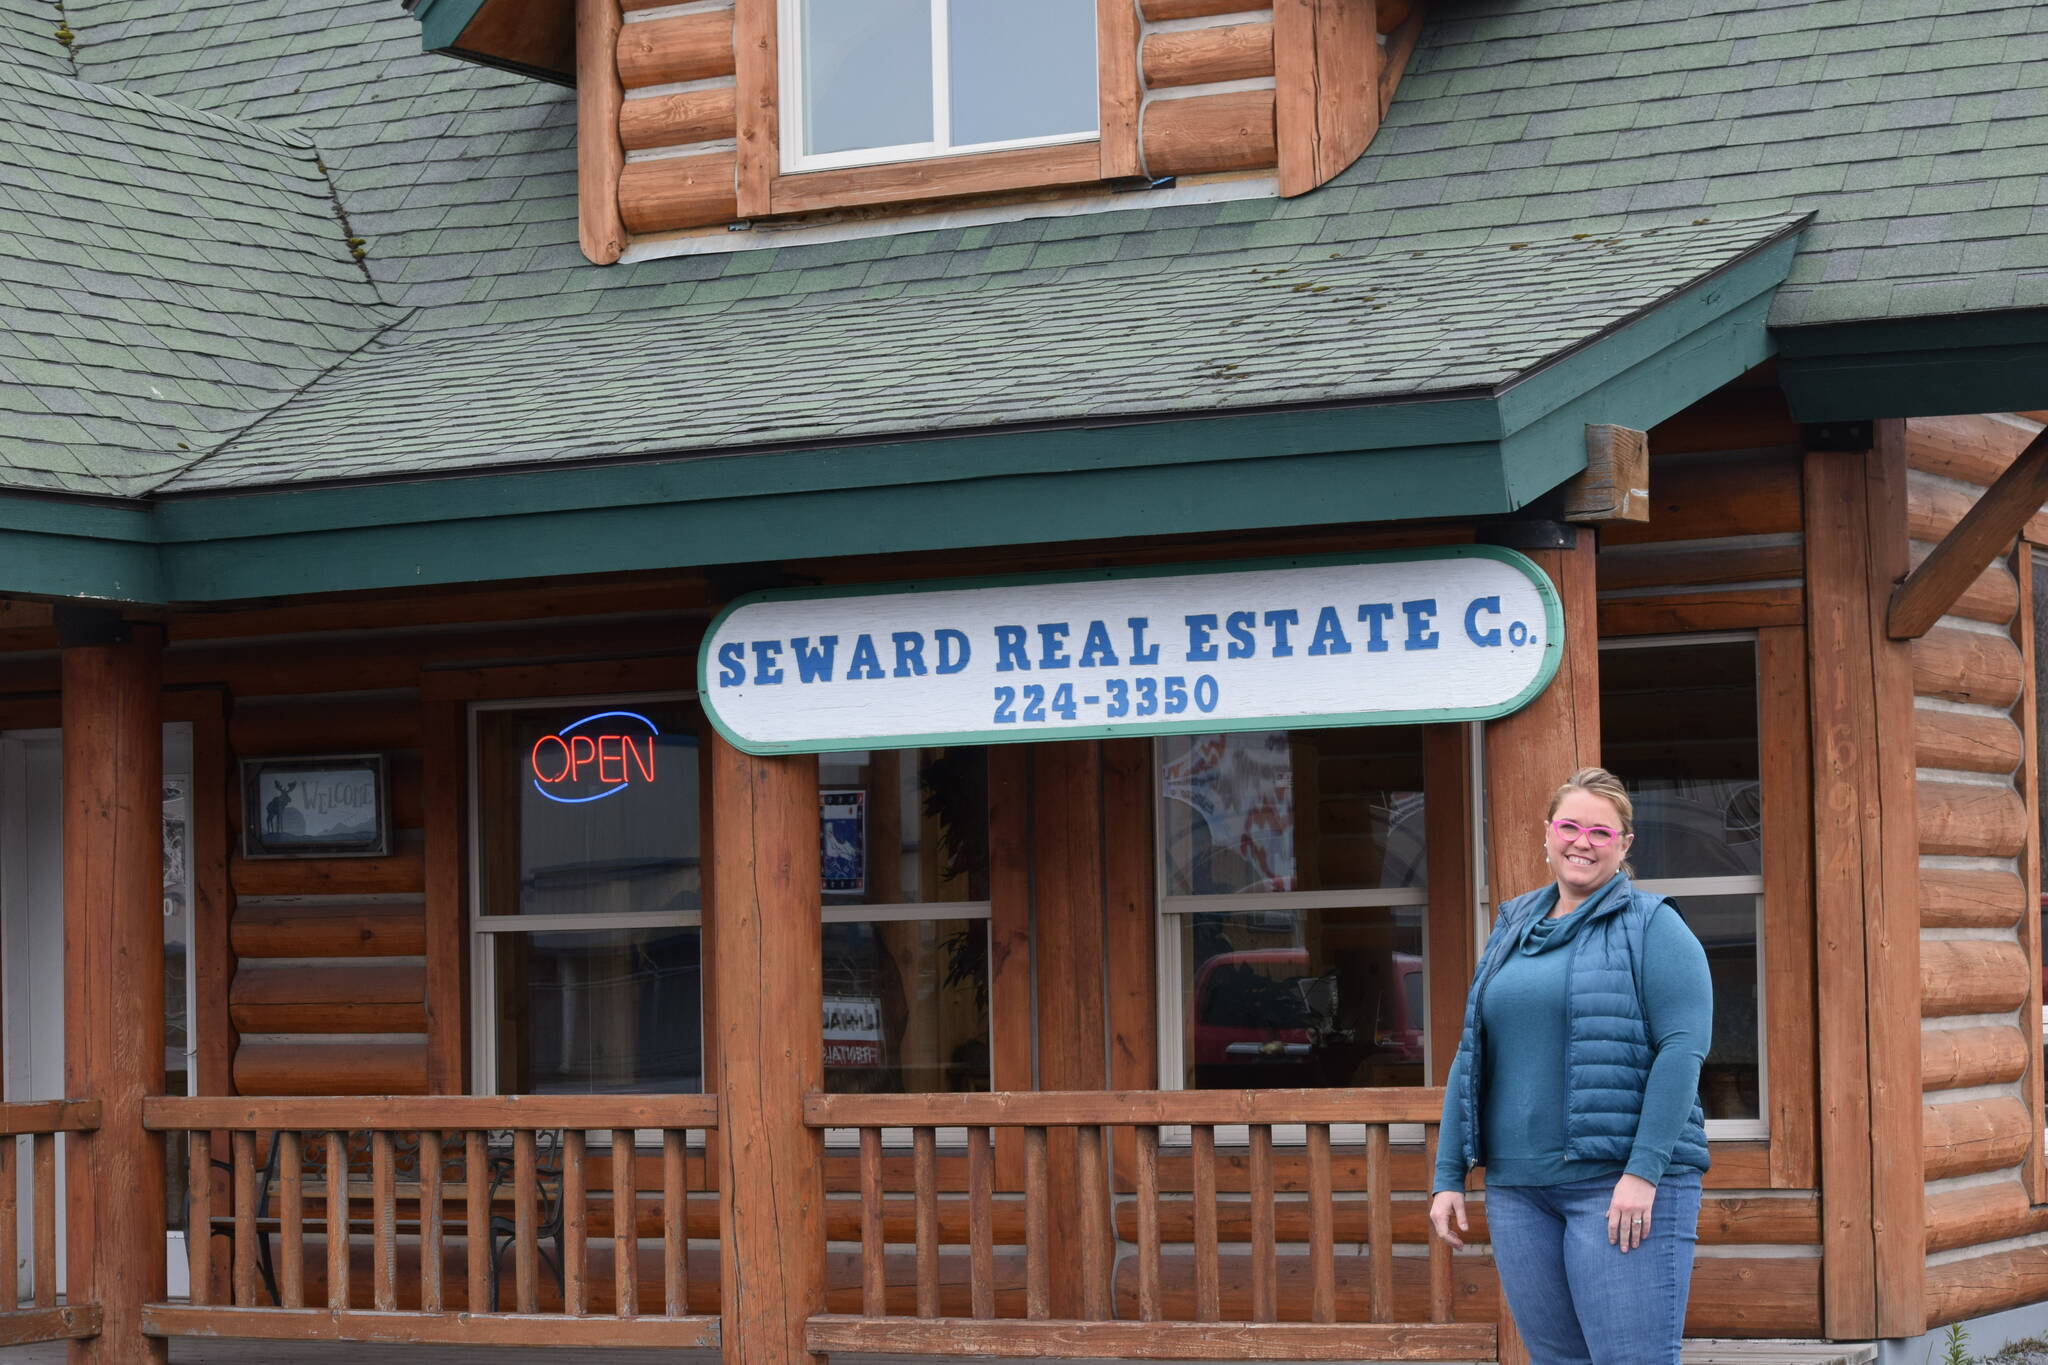 Real estate agent Jena Petersen stands in front of Seward Real Estate Company in Seward, Alaska, on Tuesday, May 3, 2022. (Camille Botello/Peninsula Clarion)